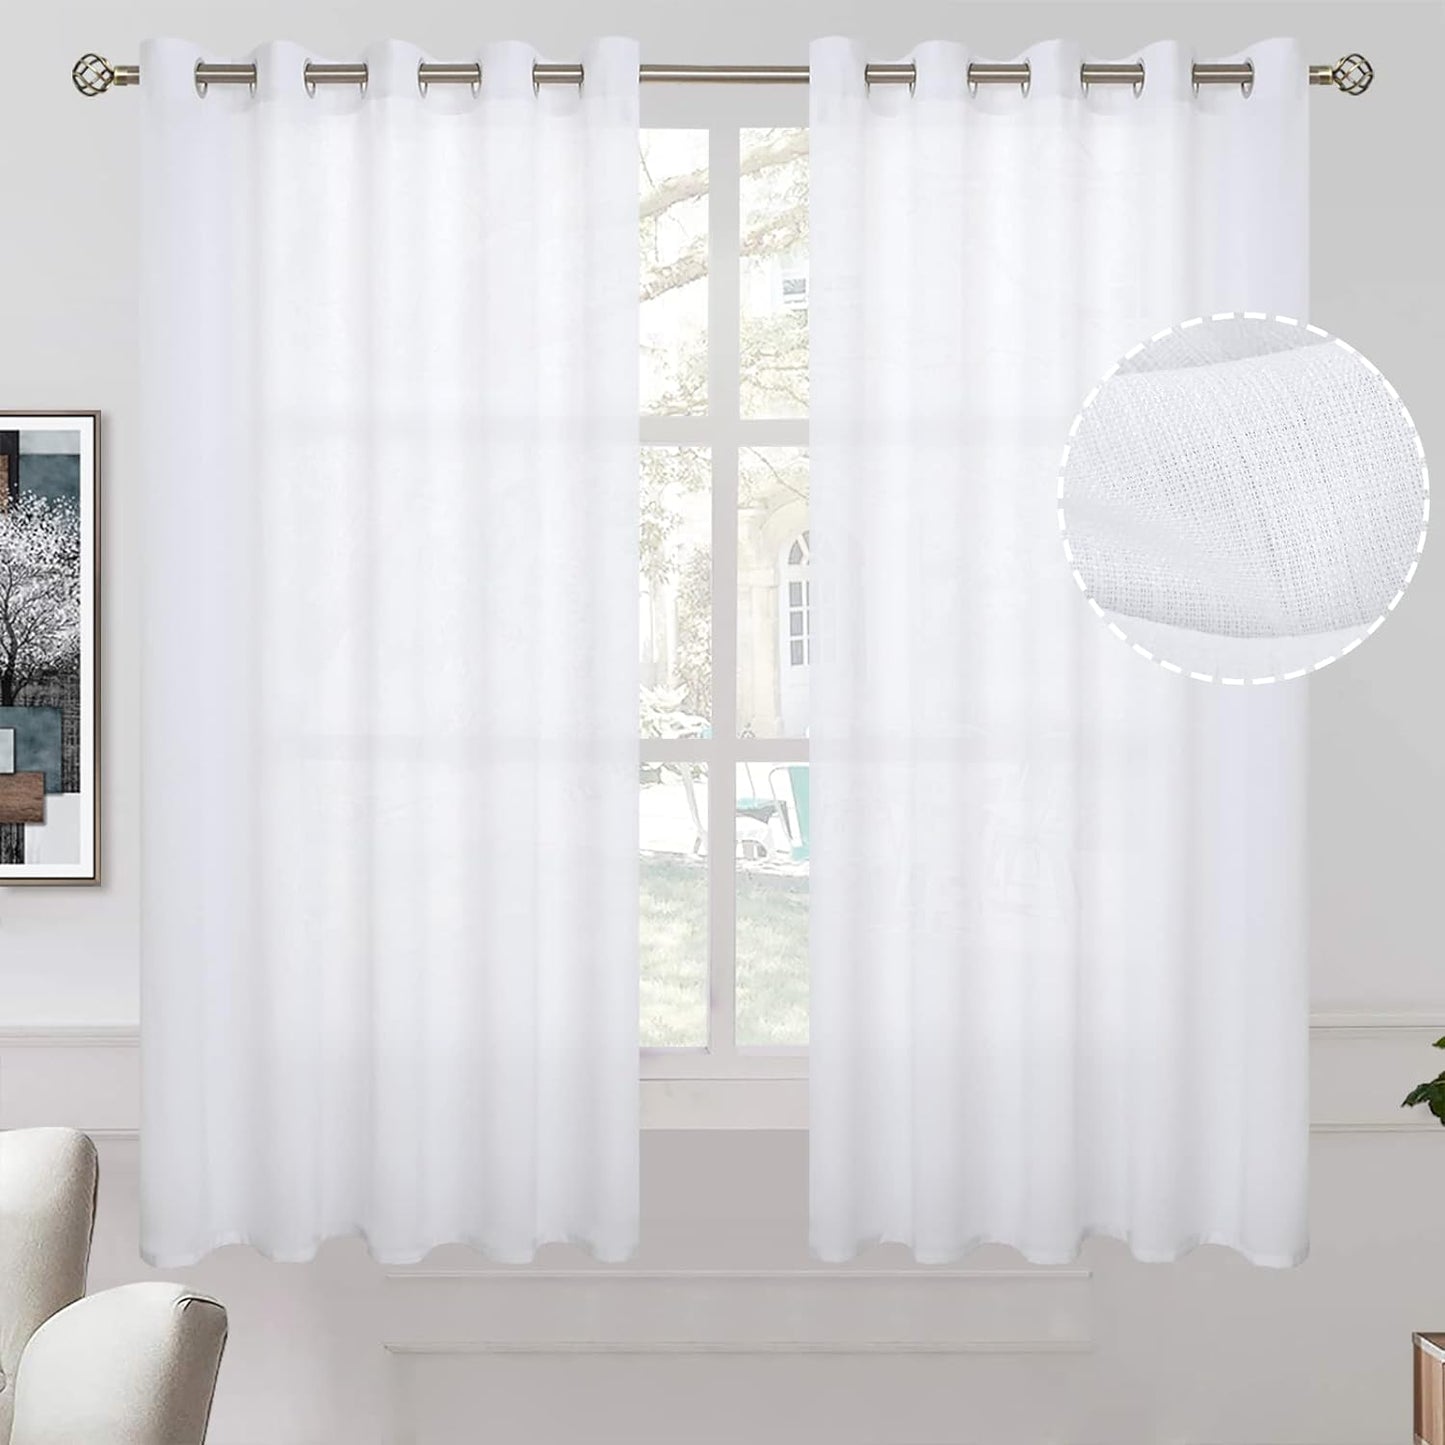 Bgment Natural Linen Look Semi Sheer Curtains for Bedroom, 52 X 54 Inch White Grommet Light Filtering Casual Textured Privacy Curtains for Bay Window, 2 Panels  BGment White 60Wx63L 